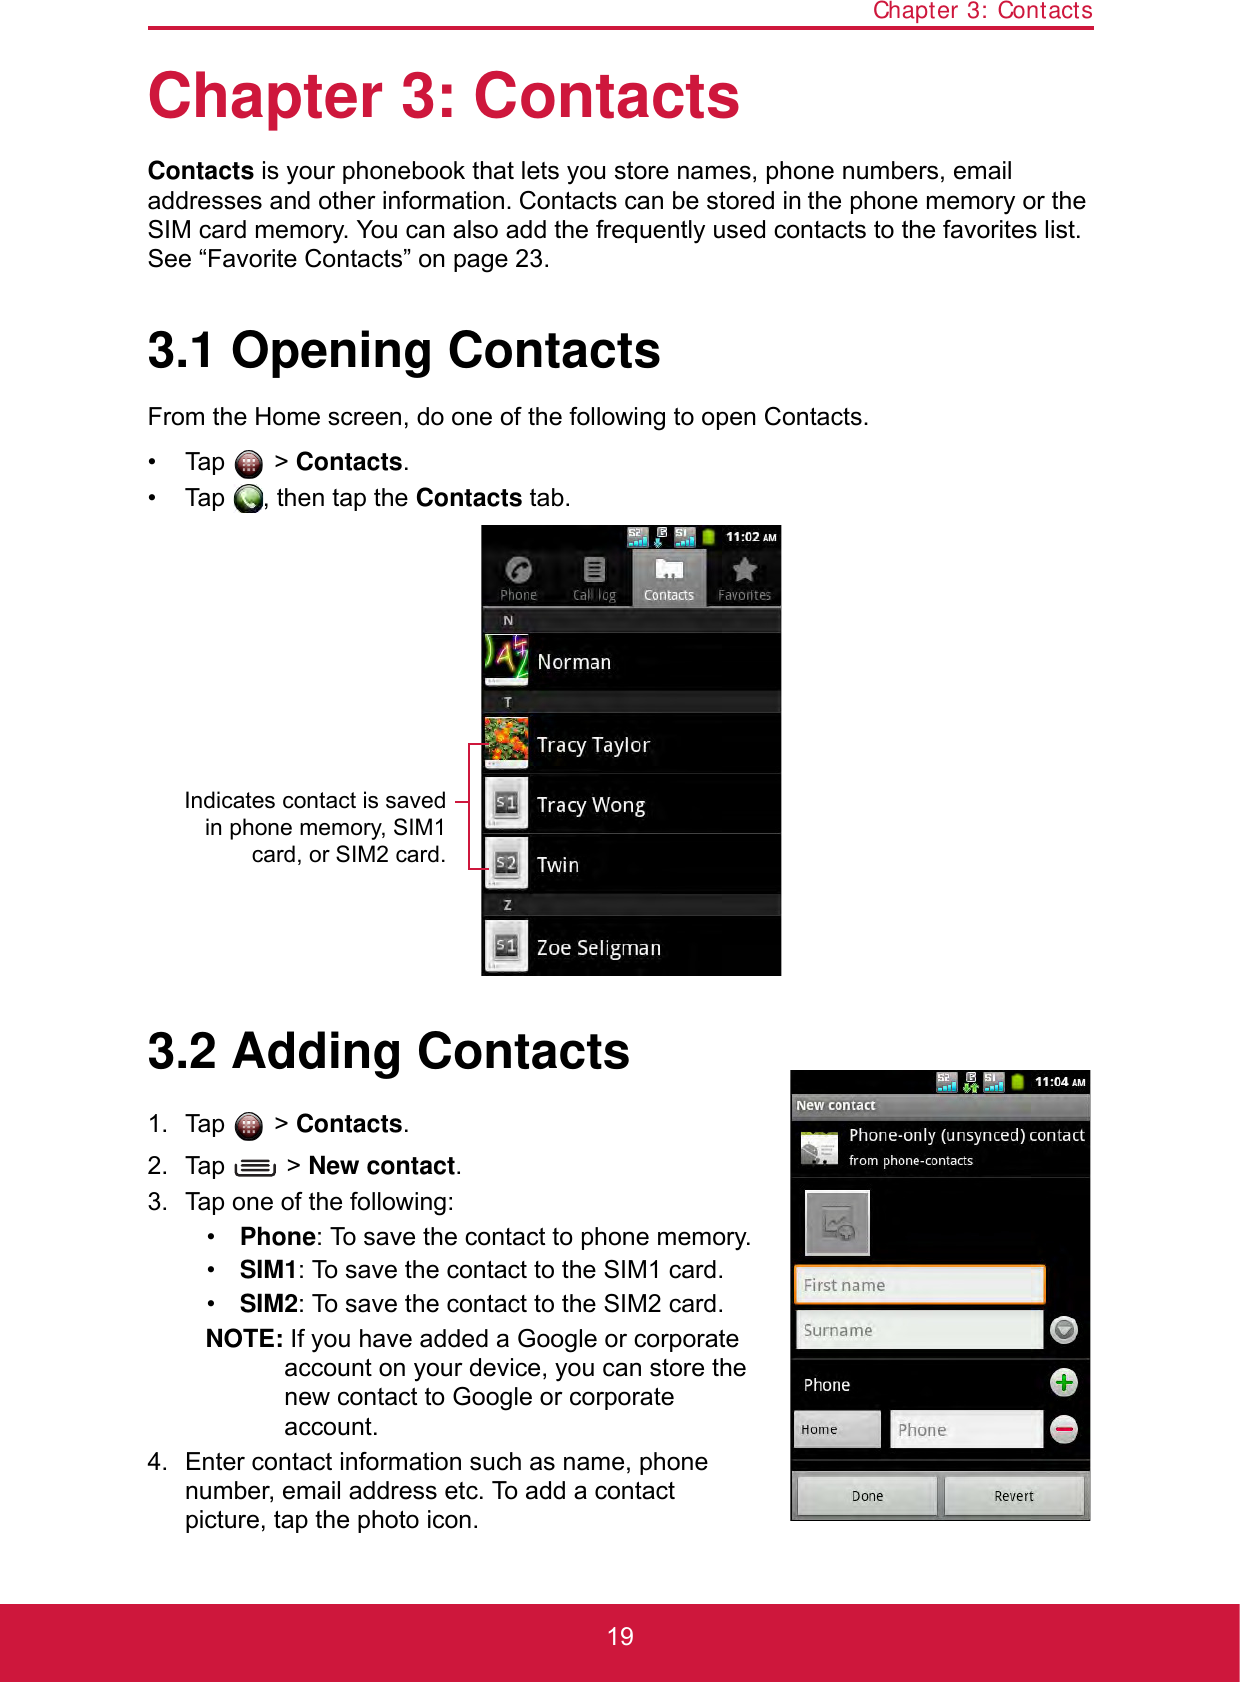 Chapter 3: Contacts19Chapter 3: ContactsContacts is your phonebook that lets you store names, phone numbers, email addresses and other information. Contacts can be stored in the phone memory or the SIM card memory. You can also add the frequently used contacts to the favorites list. See “Favorite Contacts” on page 23.3.1 Opening ContactsFrom the Home screen, do one of the following to open Contacts.• Tap  &gt; Contacts.• Tap  , then tap the Contacts tab.3.2 Adding Contacts1. Tap  &gt; Contacts.2. Tap  &gt; New contact.3. Tap one of the following:•Phone: To save the contact to phone memory.•SIM1: To save the contact to the SIM1 card.•SIM2: To save the contact to the SIM2 card.NOTE: If you have added a Google or corporate account on your device, you can store the new contact to Google or corporate account.4. Enter contact information such as name, phone number, email address etc. To add a contact picture, tap the photo icon.Indicates contact is savedin phone memory, SIM1card, or SIM2 card.